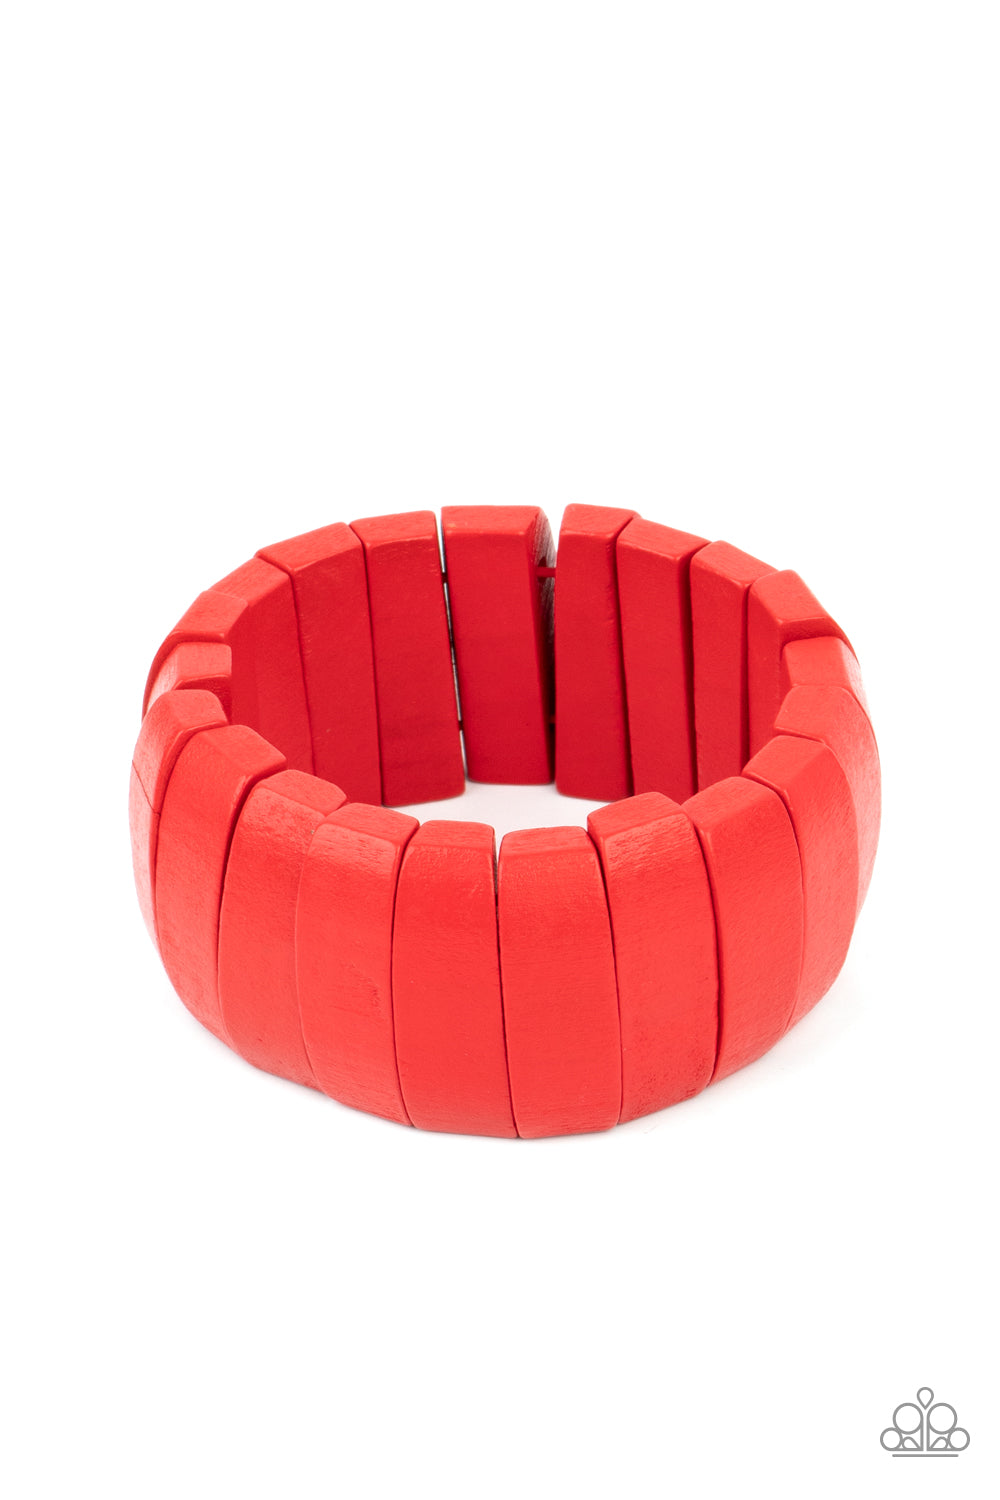 Paparazzi Accessories Raise The BARBADOS - Red Wood Bracelet One and Done